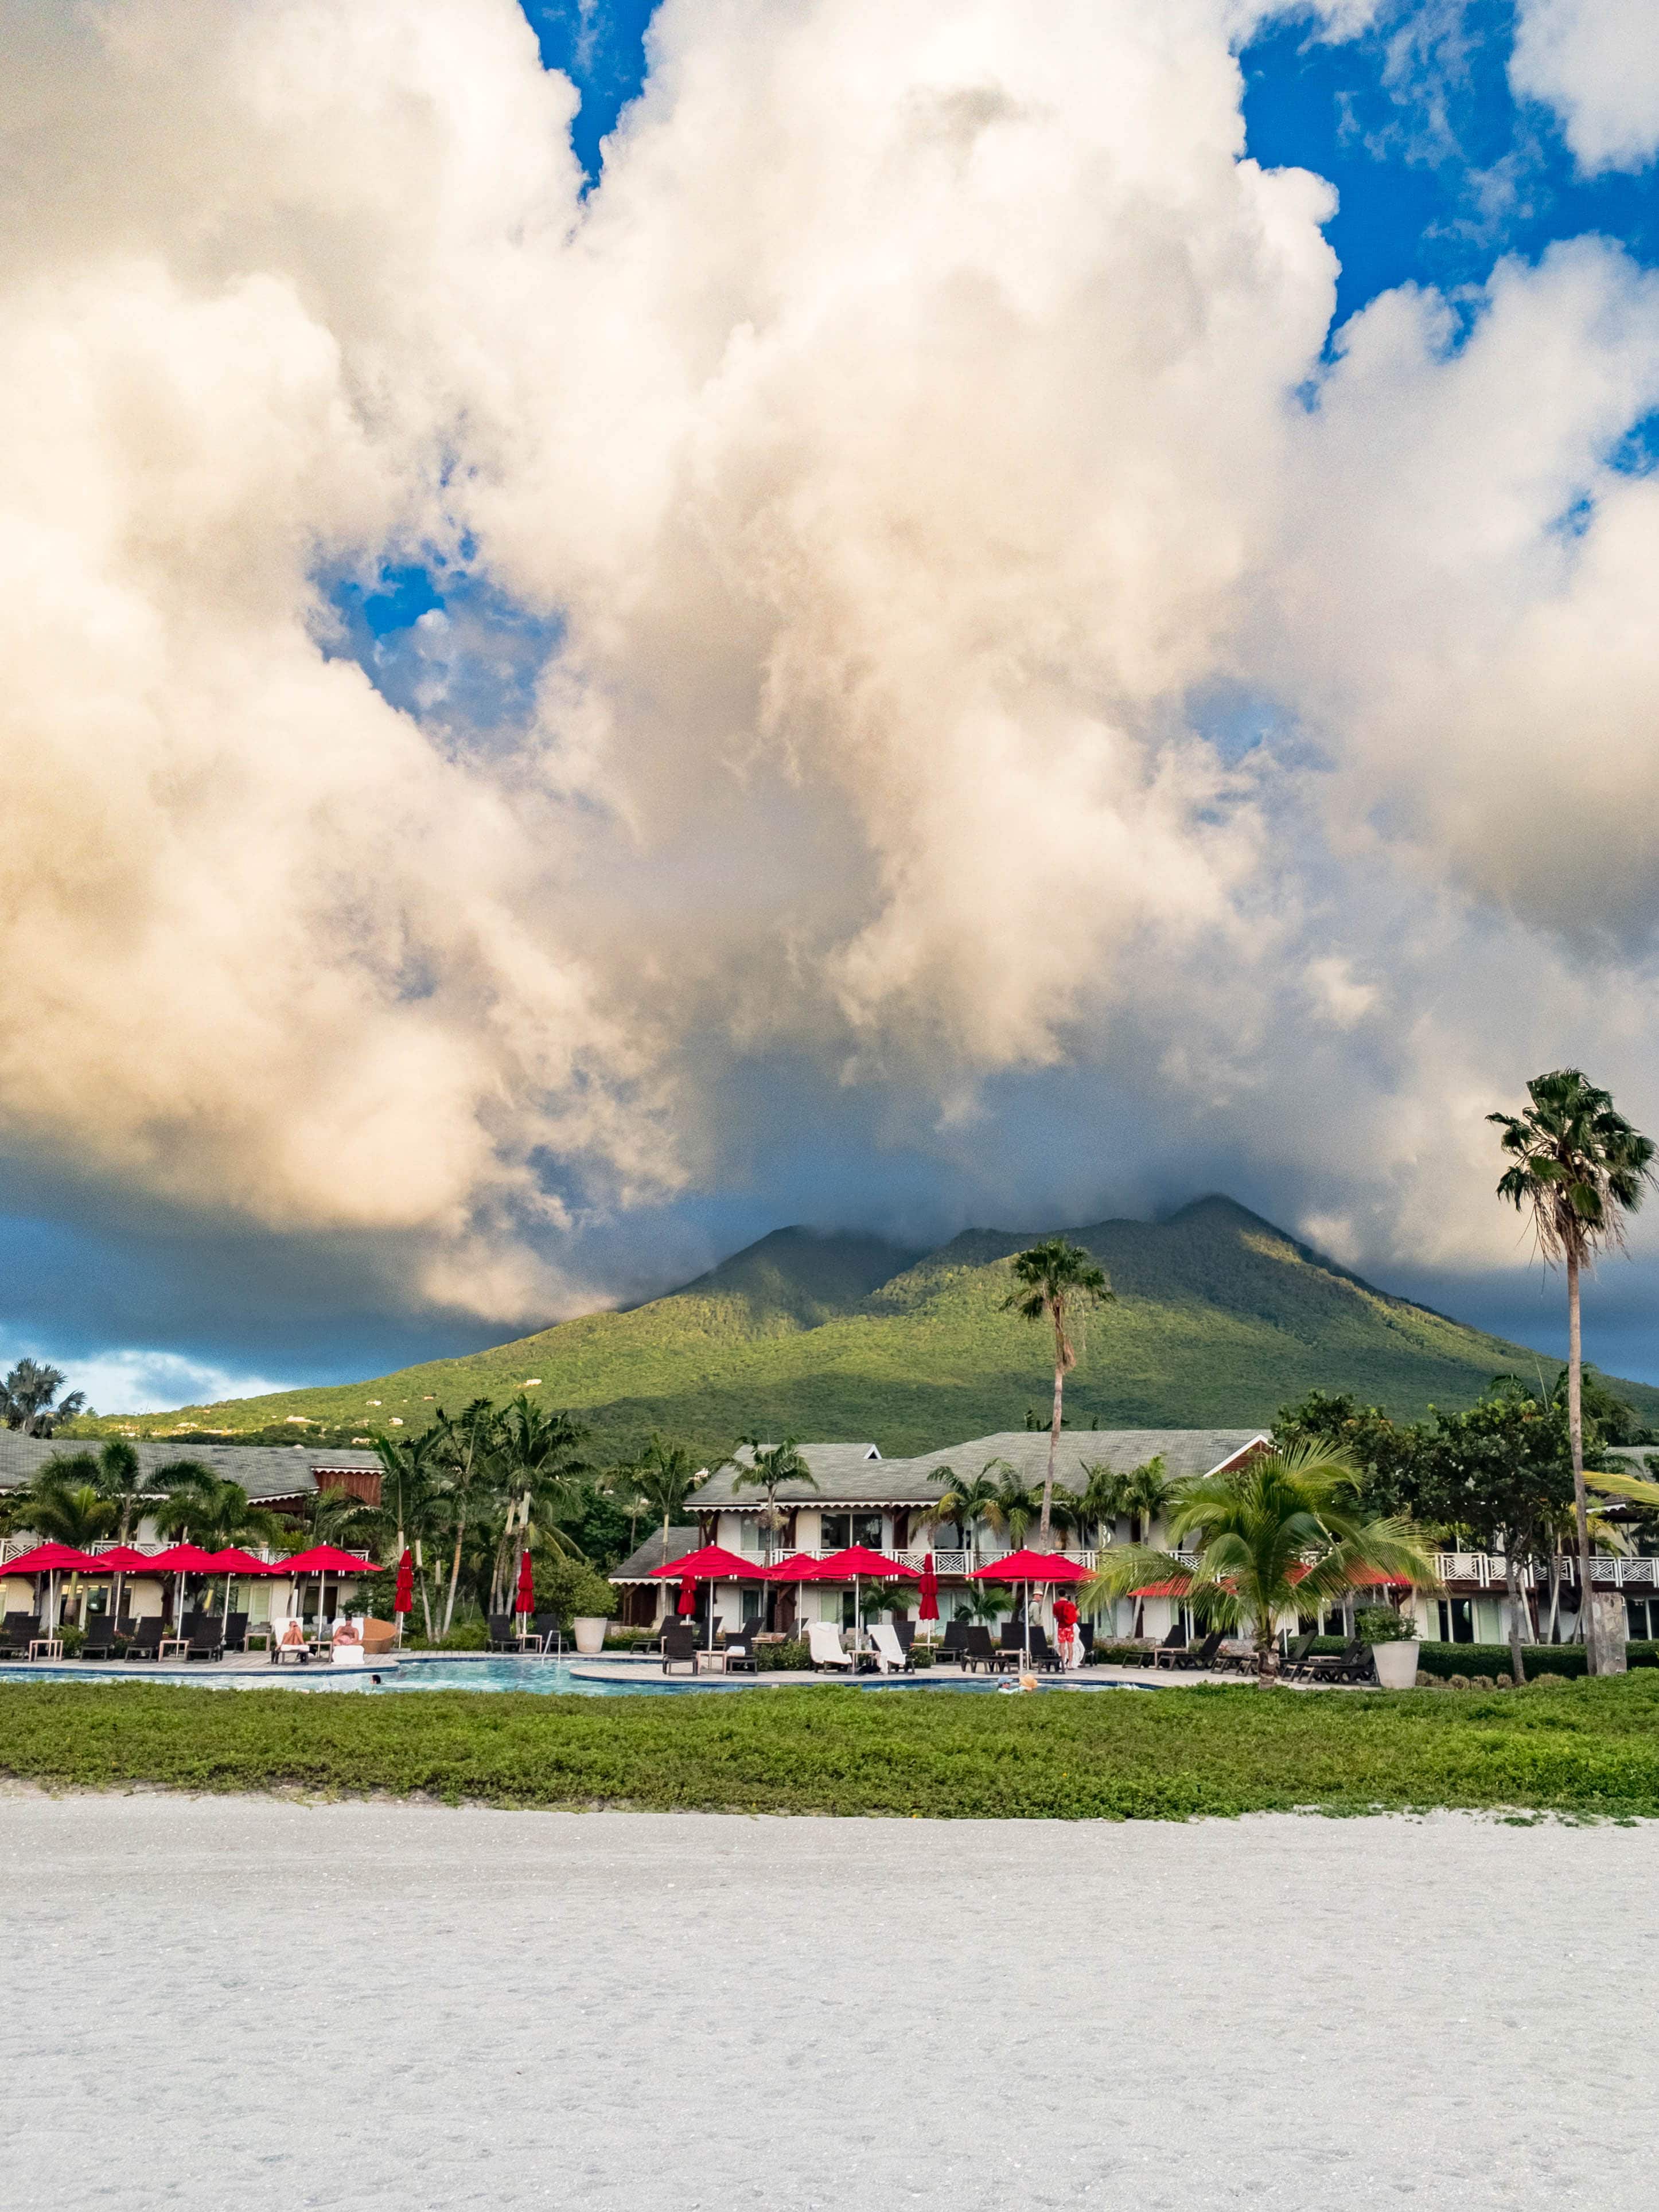 Thanks to its home on Nevis, this particular Four Seasons, just oozes exotic.